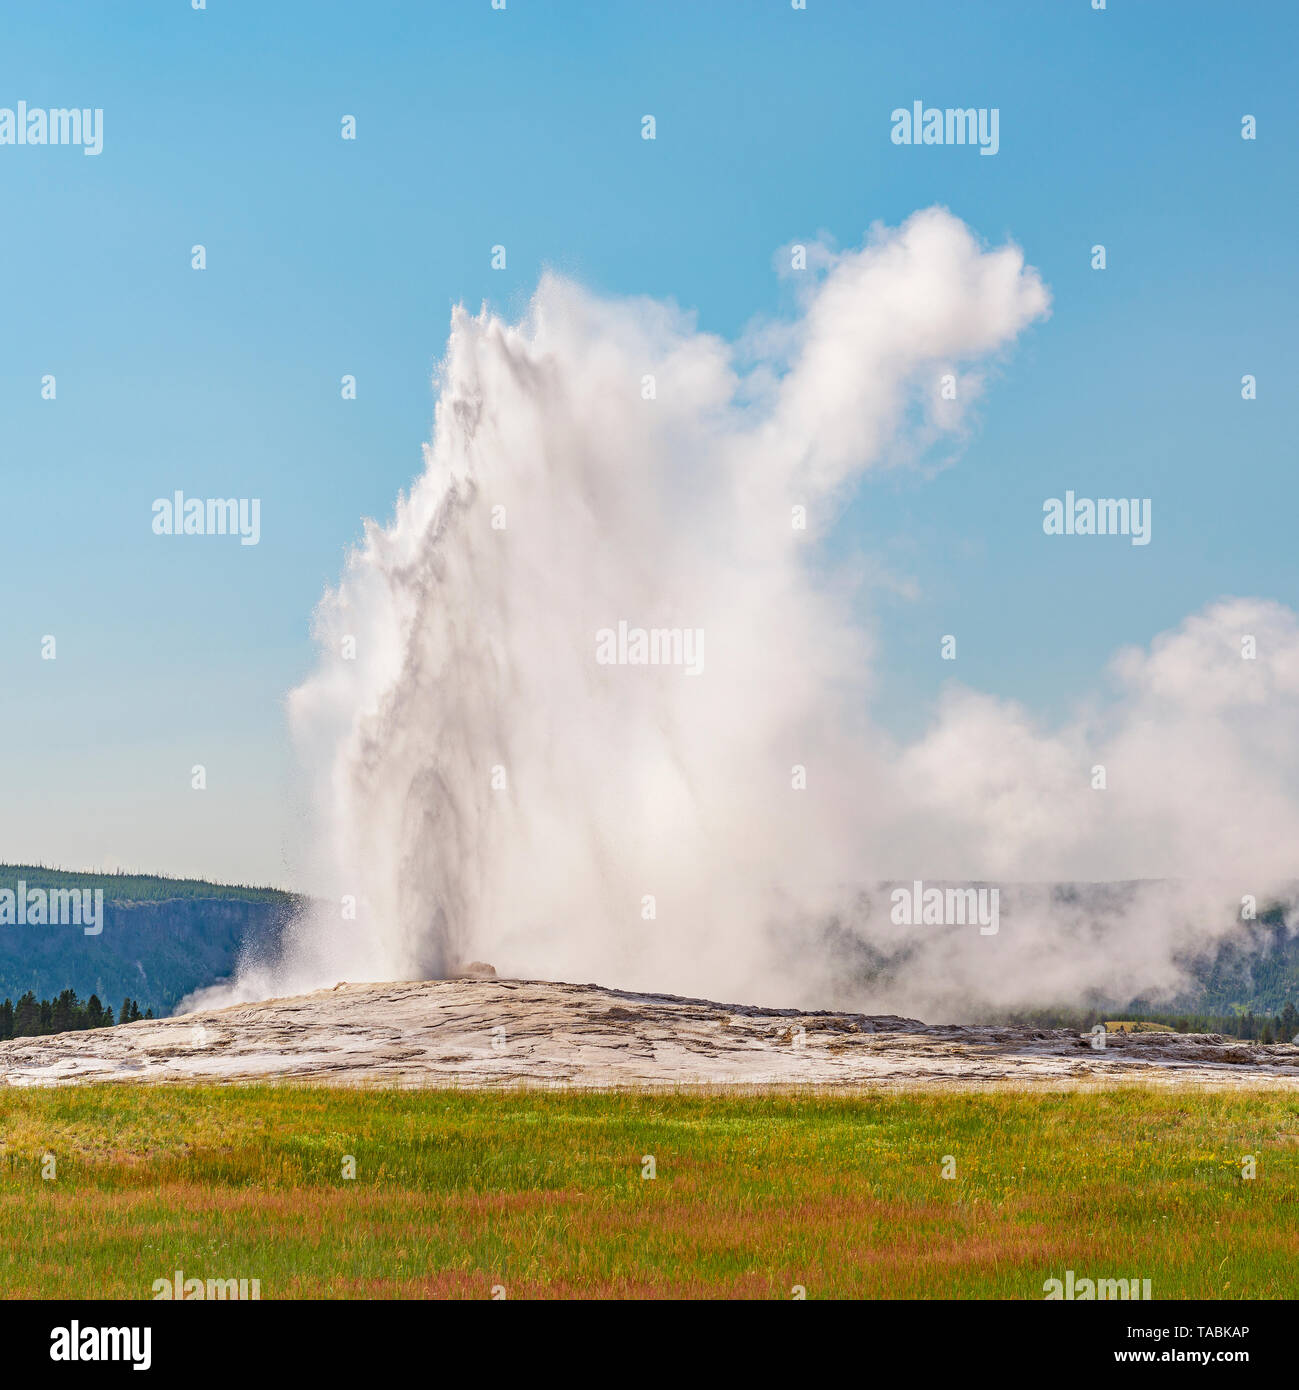 Square photograph of Old Faithful geyser during an eruption on a bright summer day, Yellowstone National Park, Wyoming, USA. Stock Photo